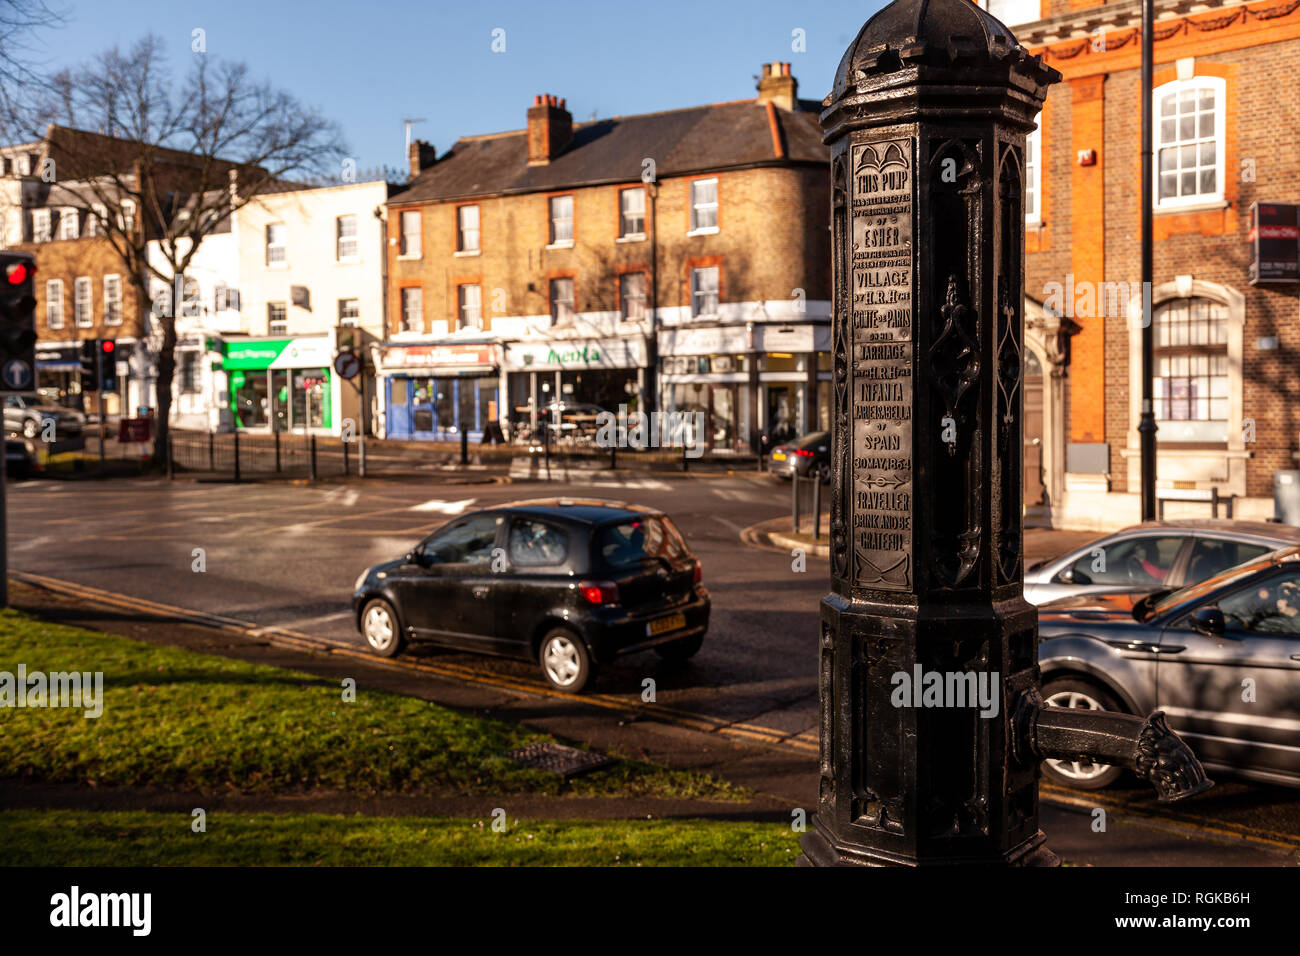 Esher, England - January 21, 2019. Located just outside of London, Esher is a twenty minute trainride from Metropolitan London. With its proximity to  Stock Photo